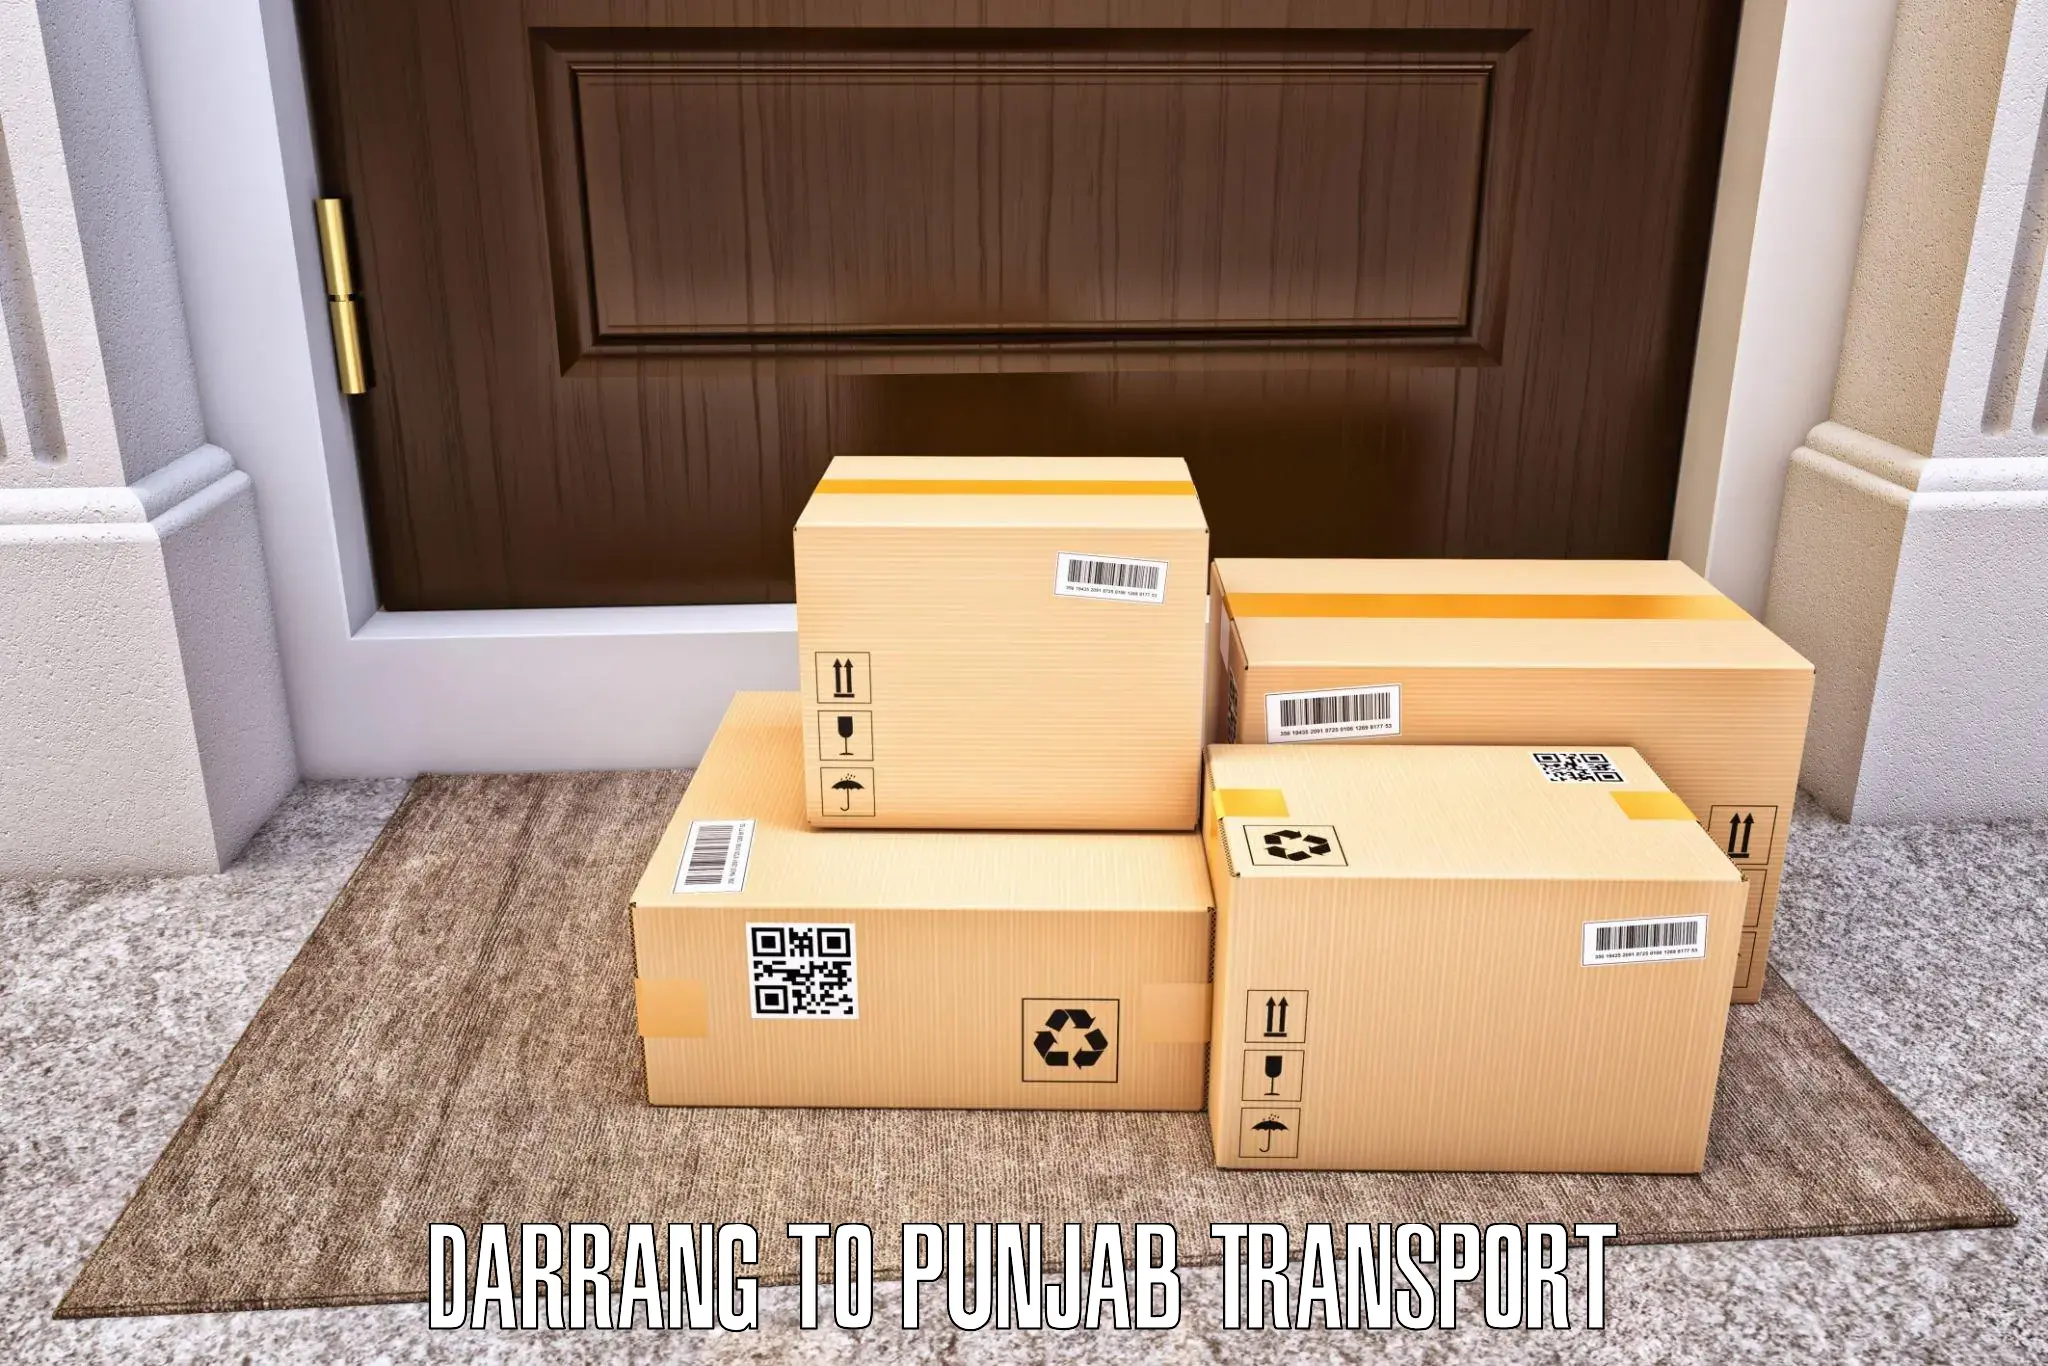 Commercial transport service Darrang to Patiala